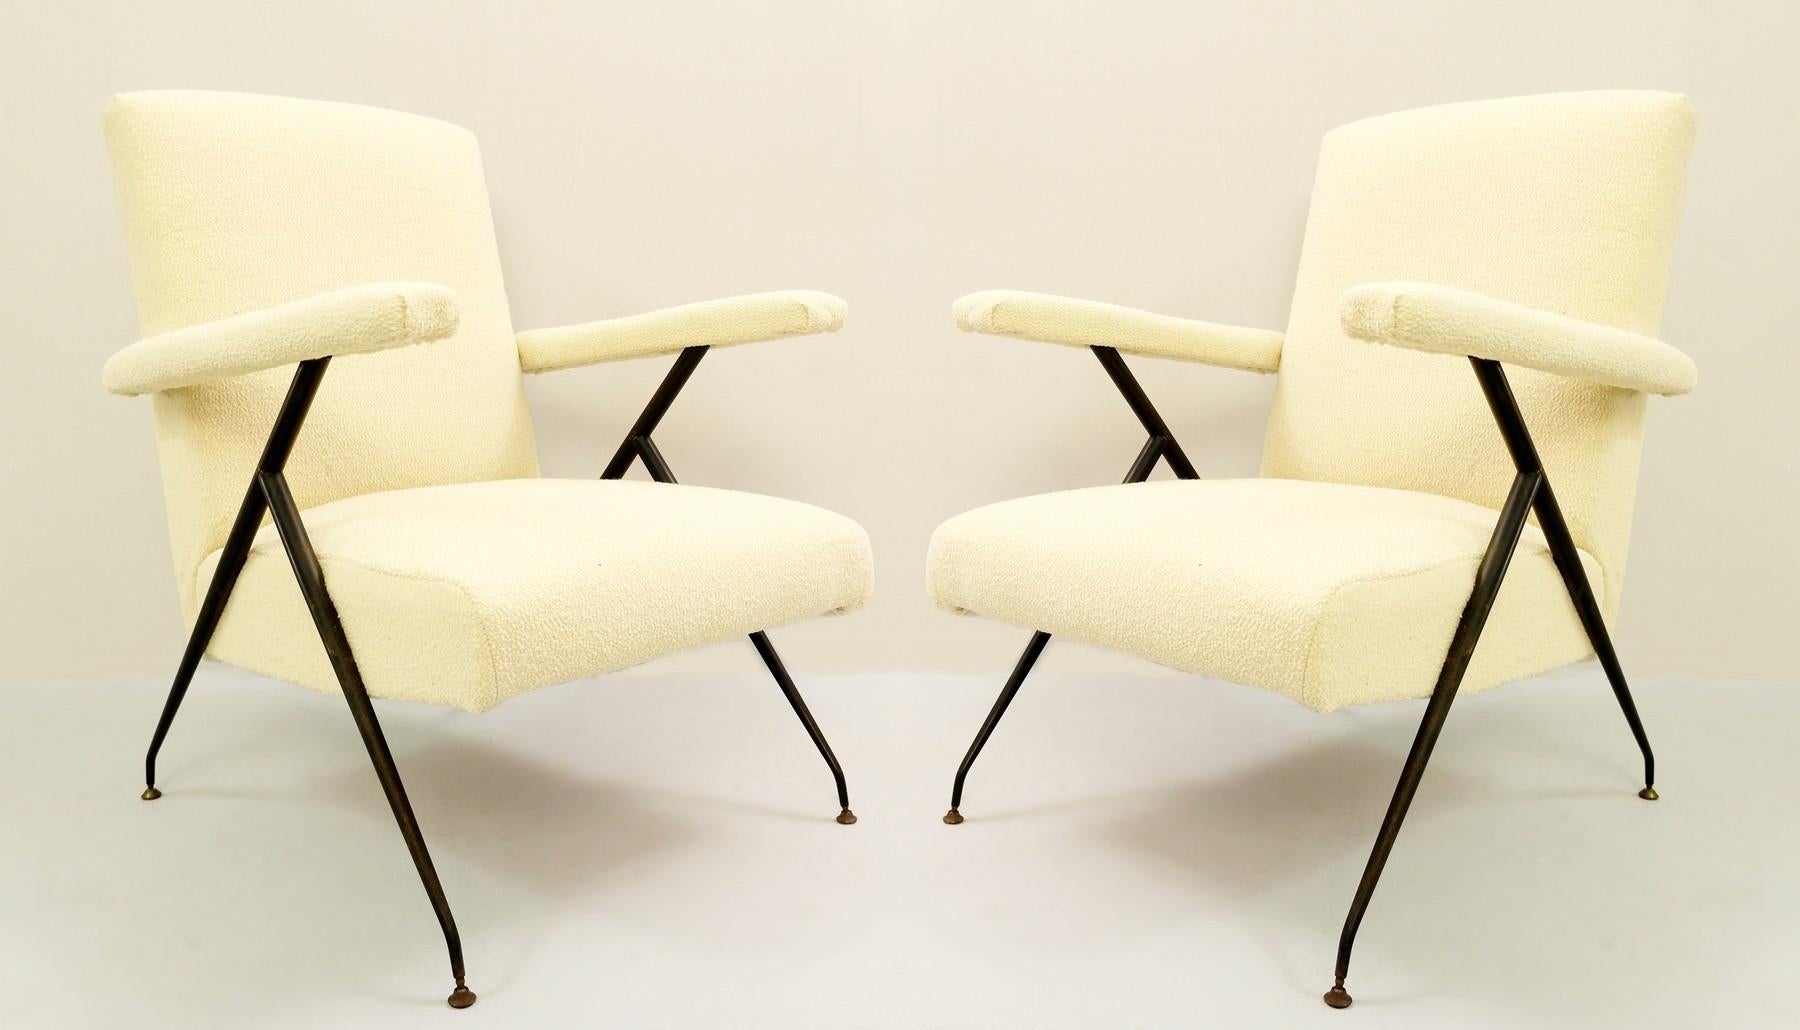 Pair of Italian armchairs with adjustable backrests - new cream upholstery.